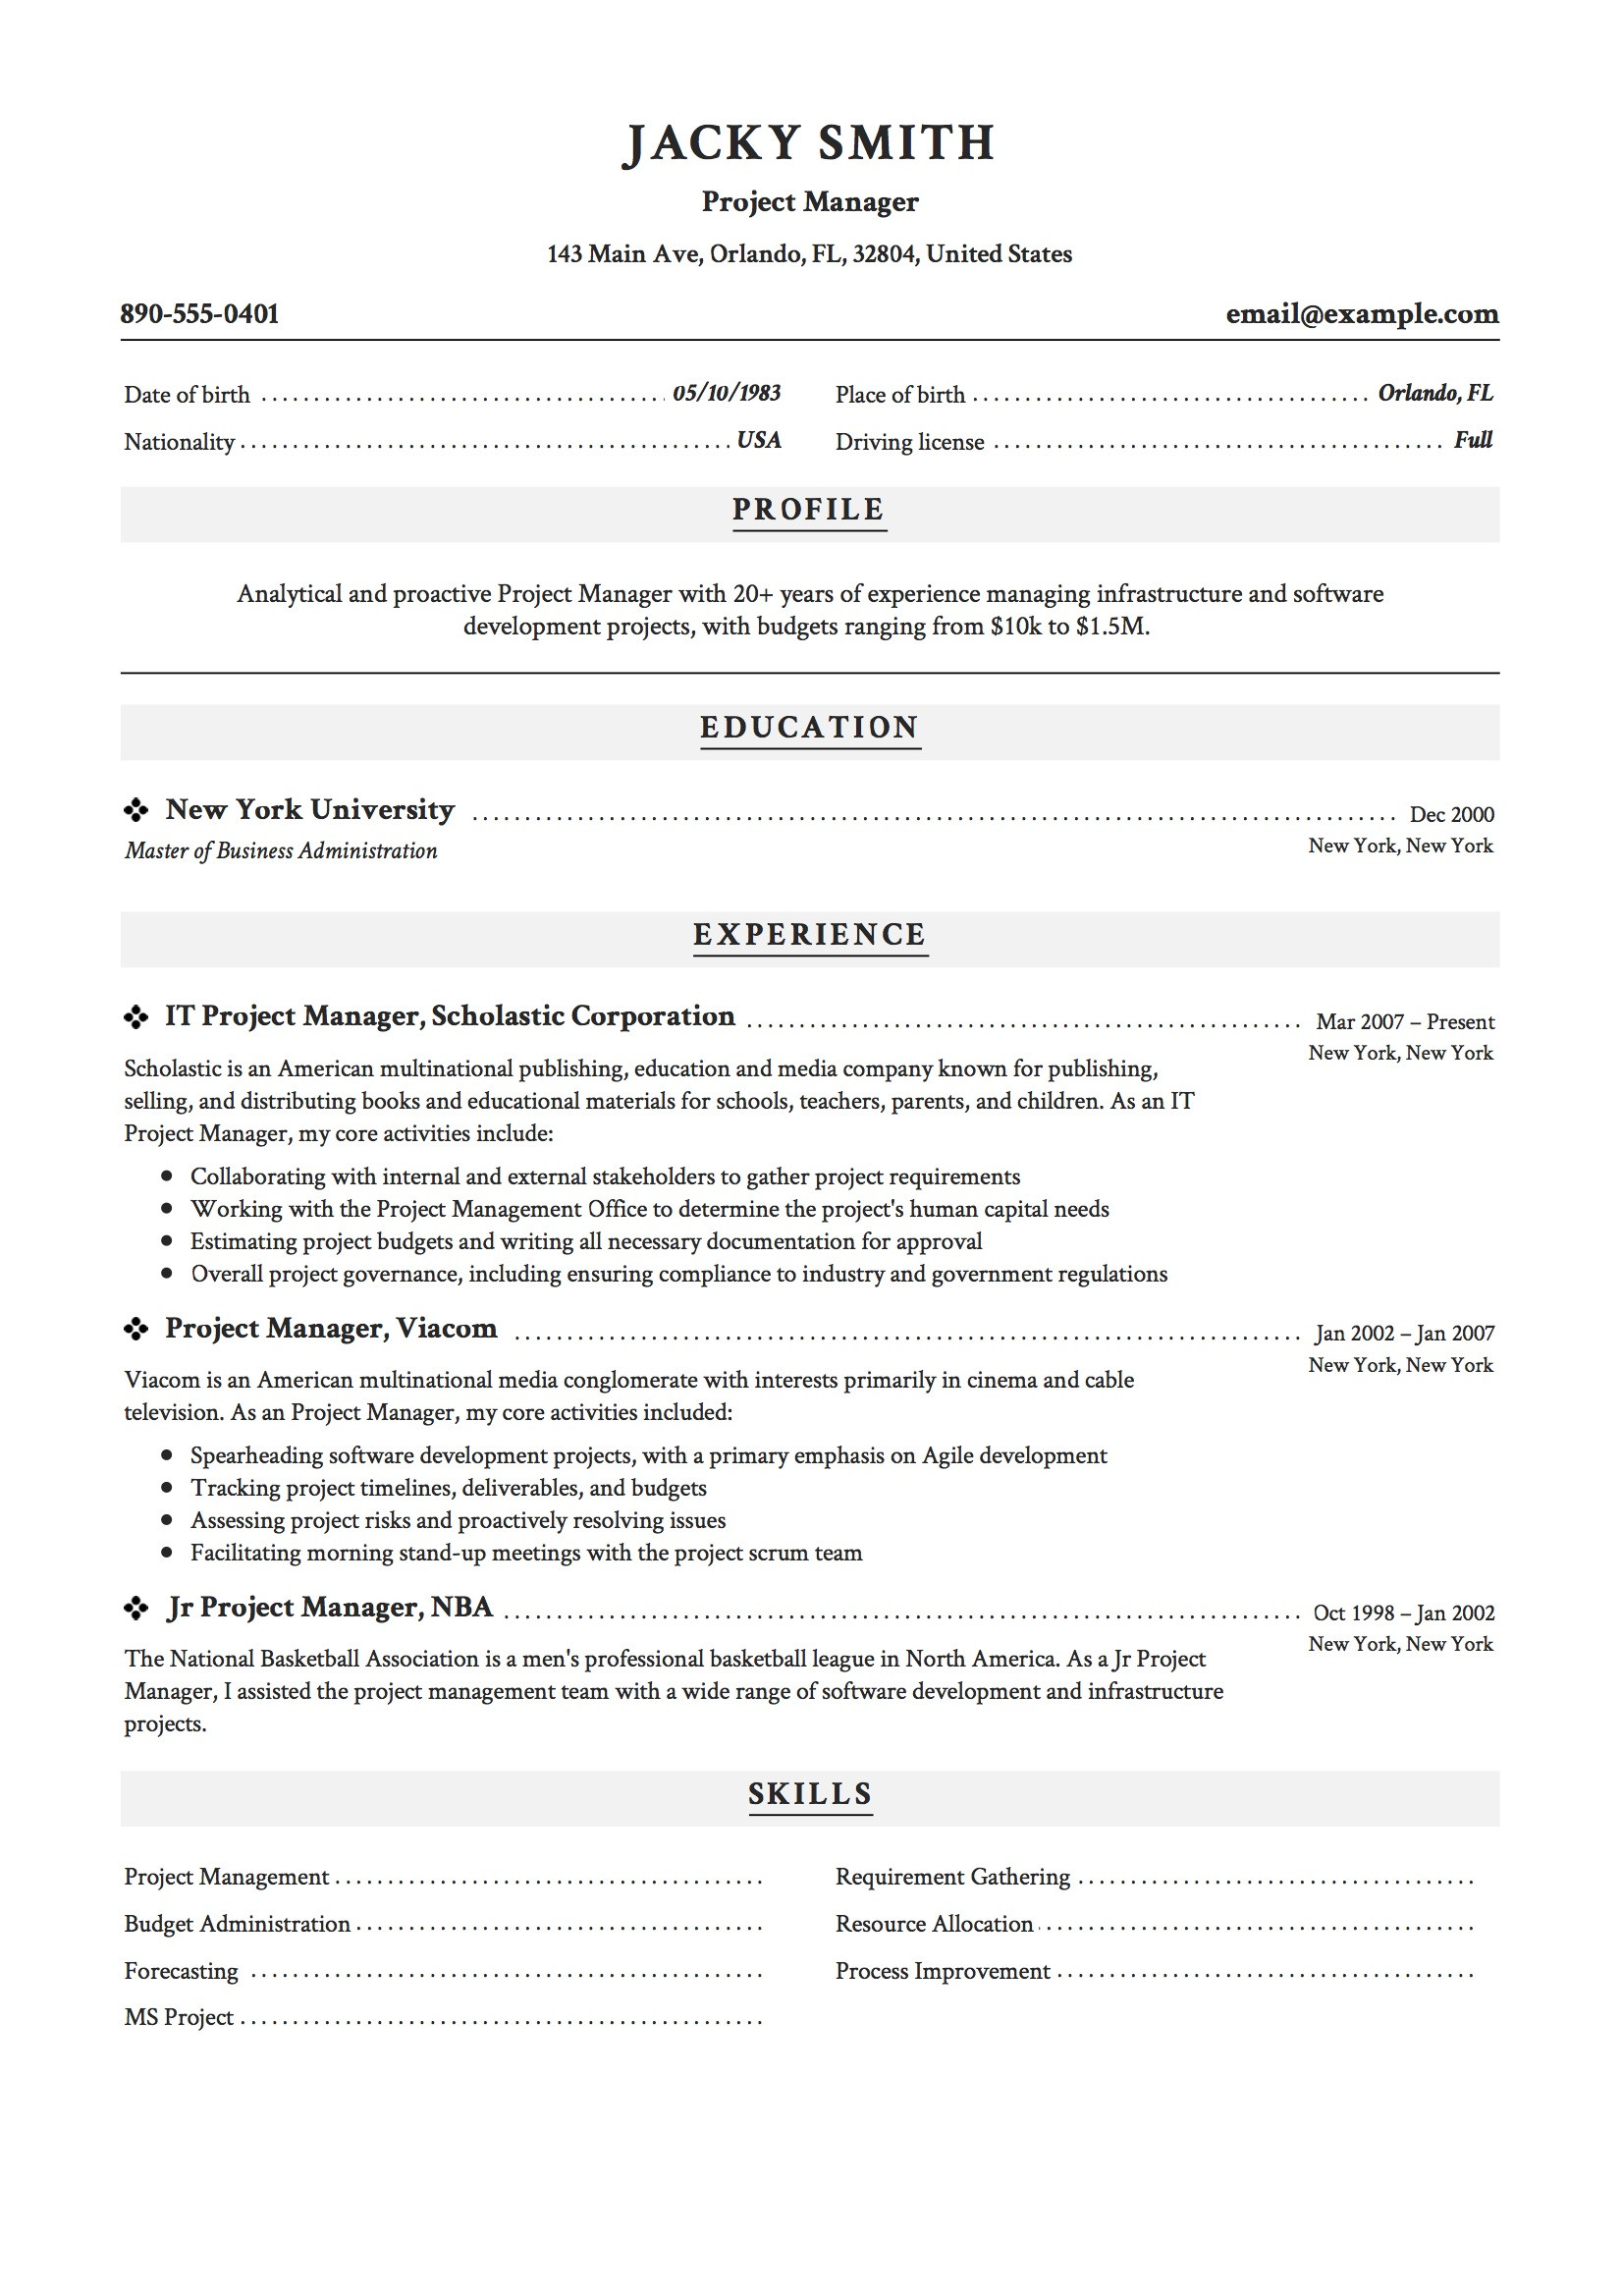 Junior It Project Manager Resume Sample 20 Project Manager Resume Examples & Full Guide Pdf & Word 2021